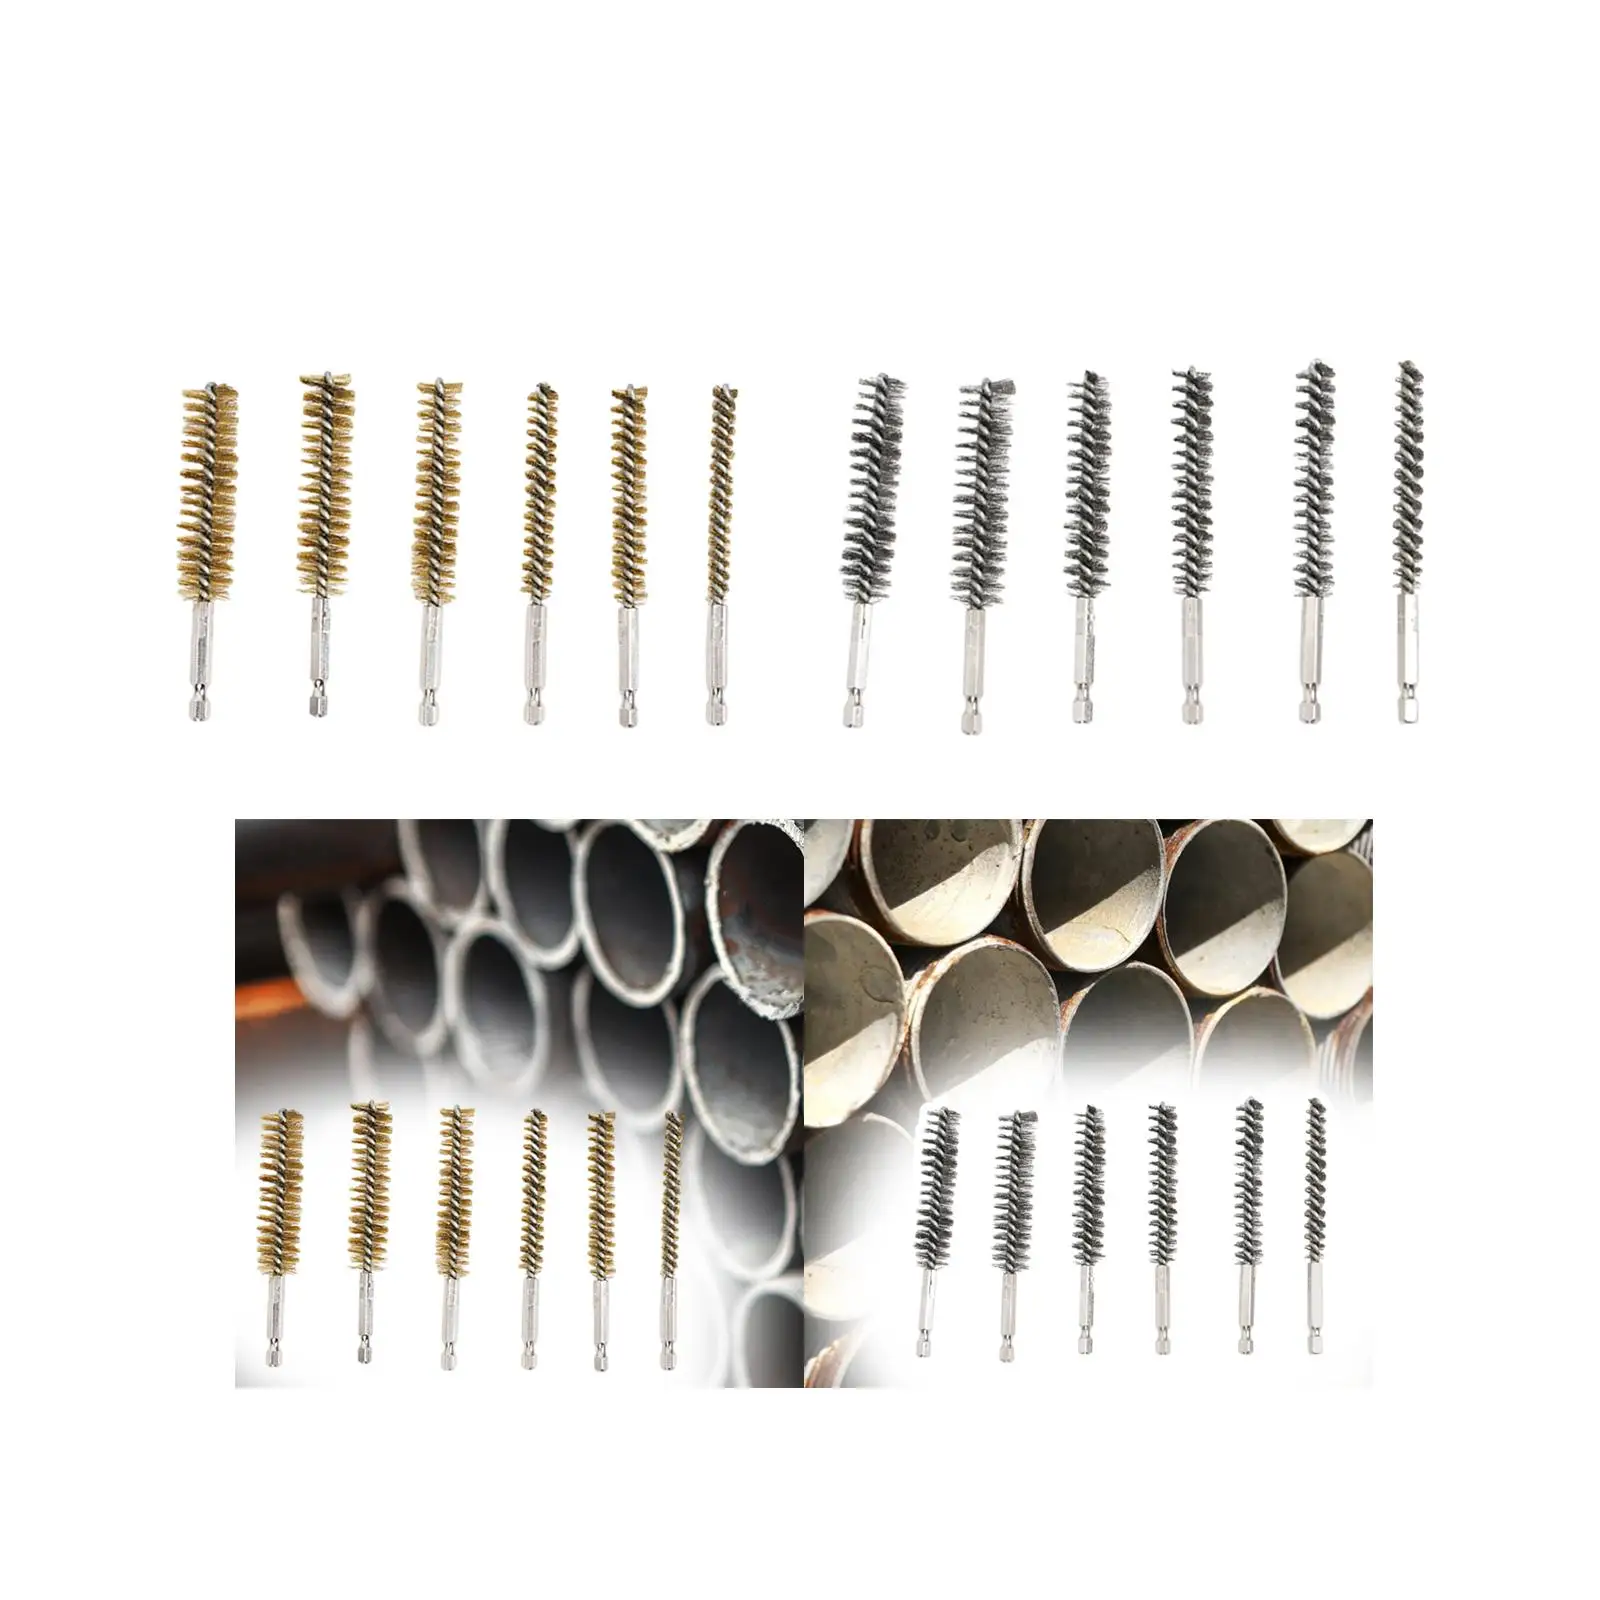 6x 8mm 10mm 12mm 15mm 17mm 19mm Bore Cleaning Brush for Electric Drill Impact Machining Polishing Power Drill Automotive